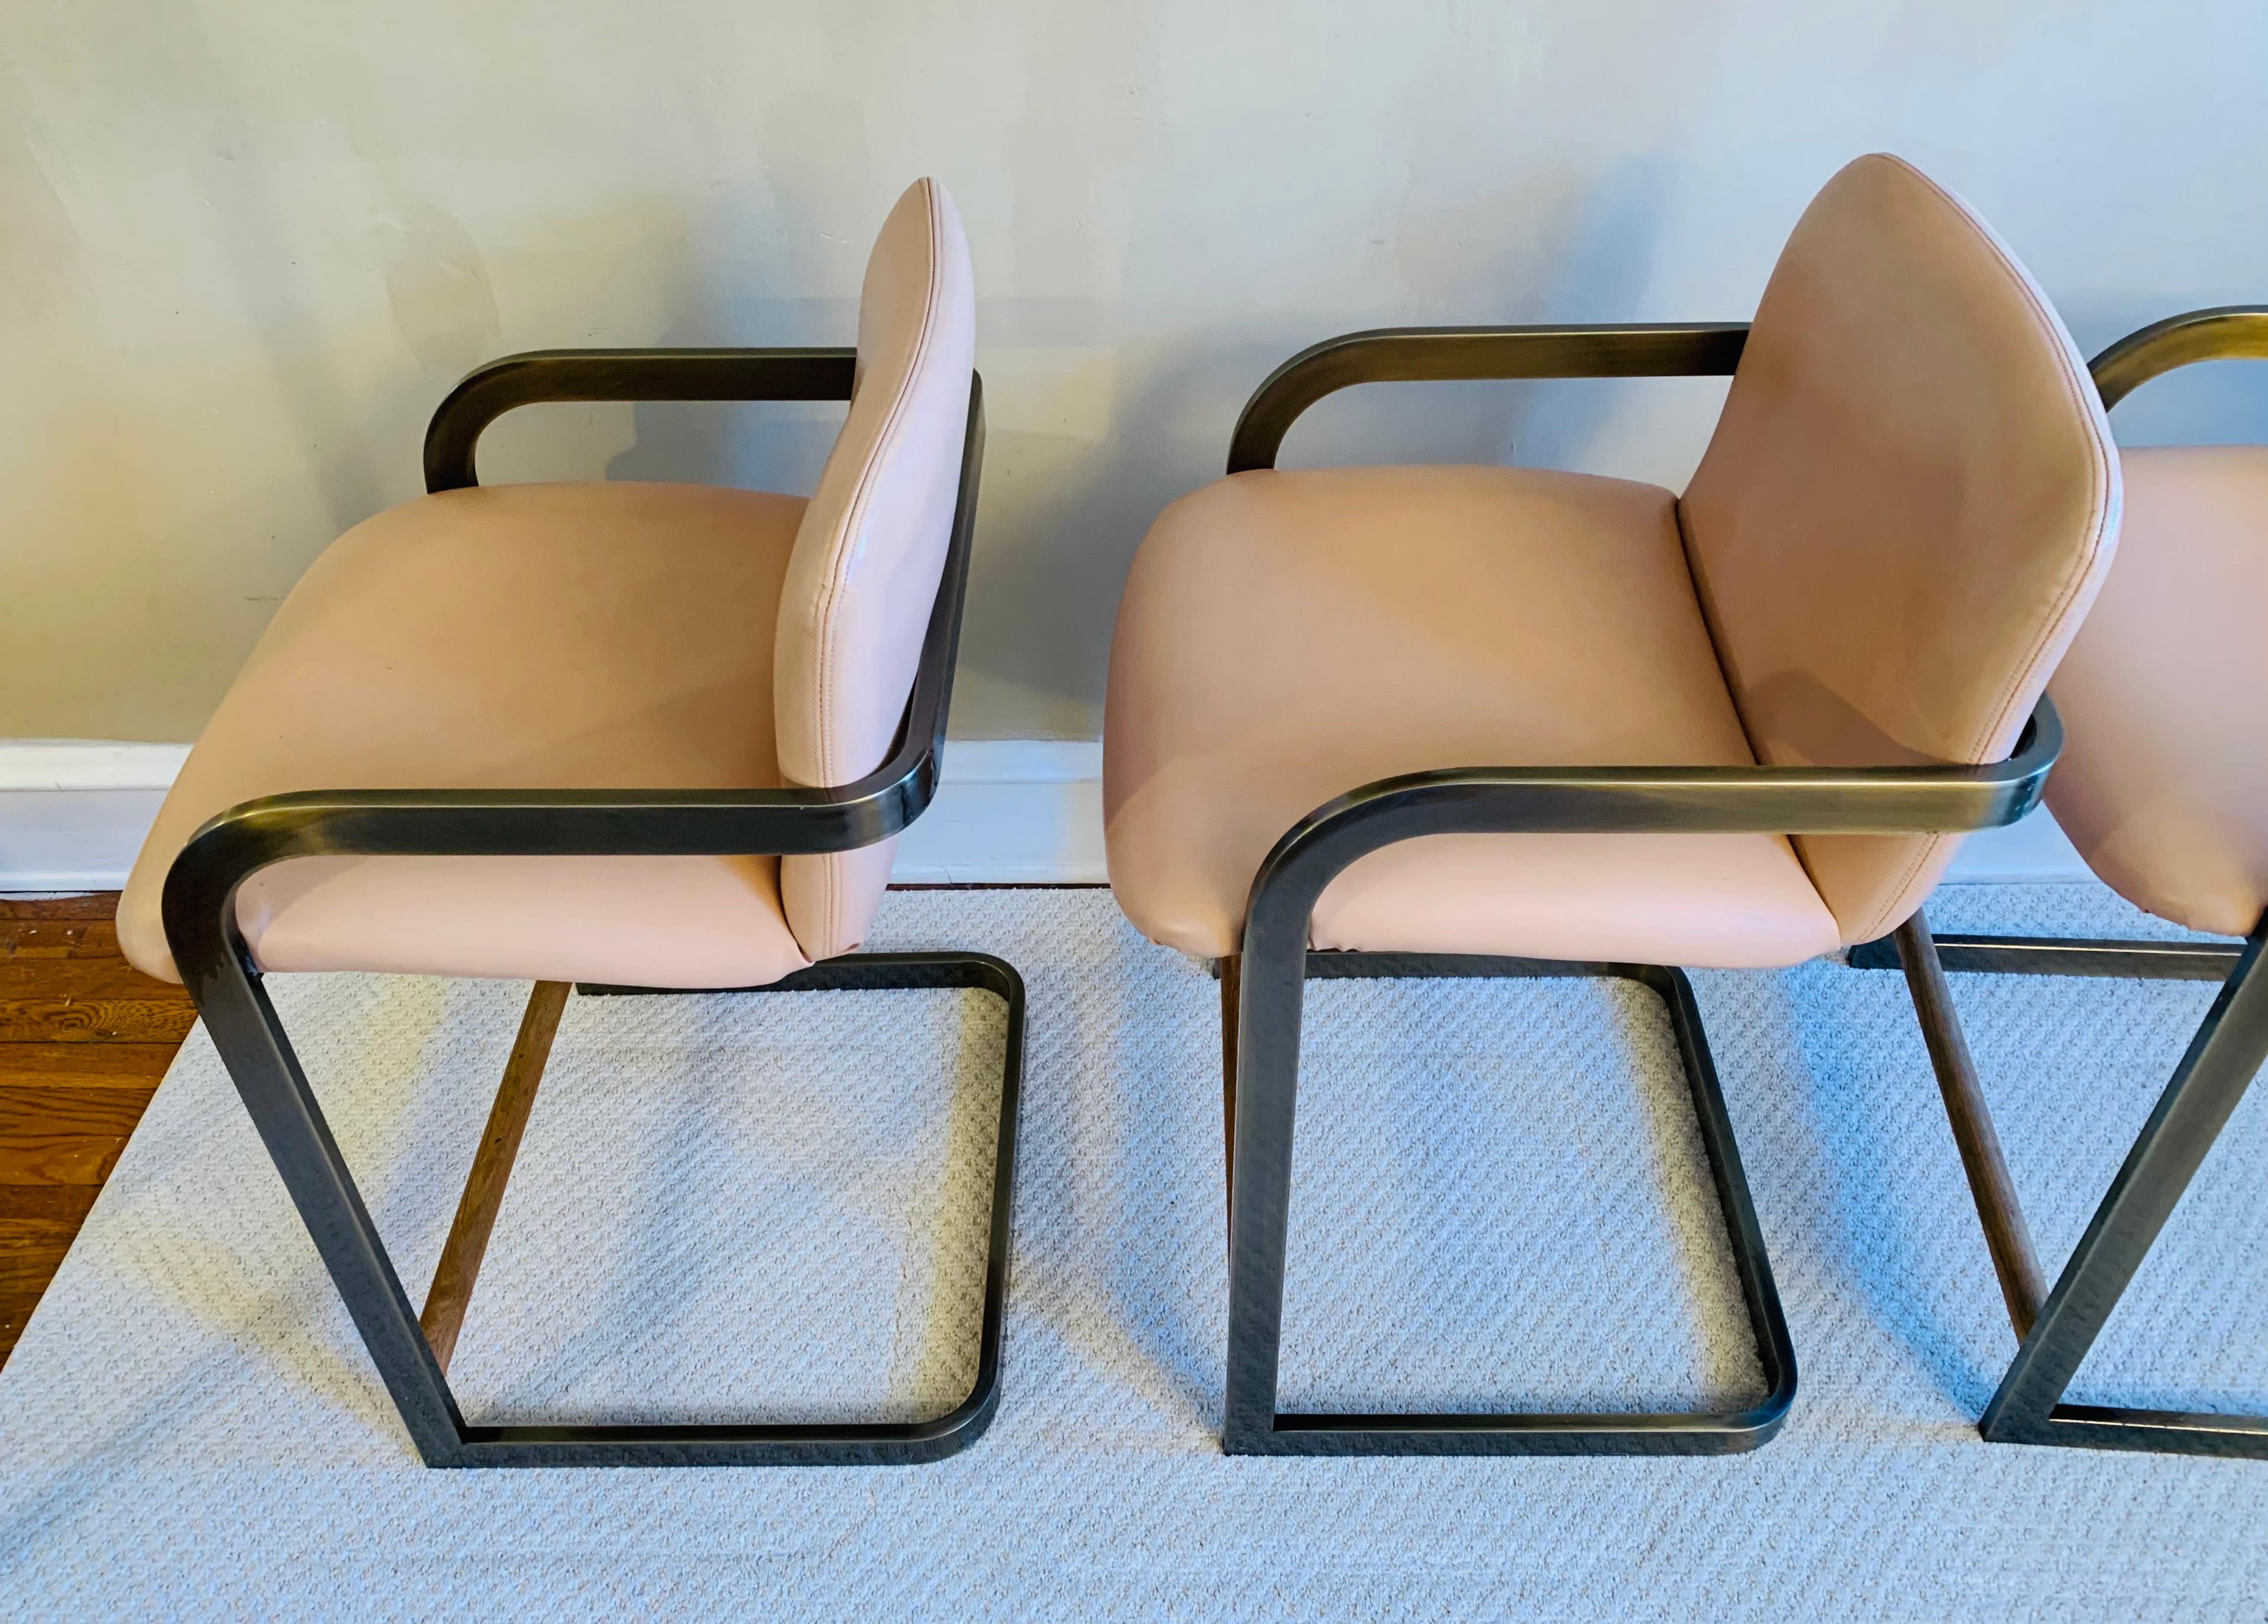 Burnished Vintage Midcentury Cantilever Stools in the Milo Baughman Style by D.I.A. 1980's